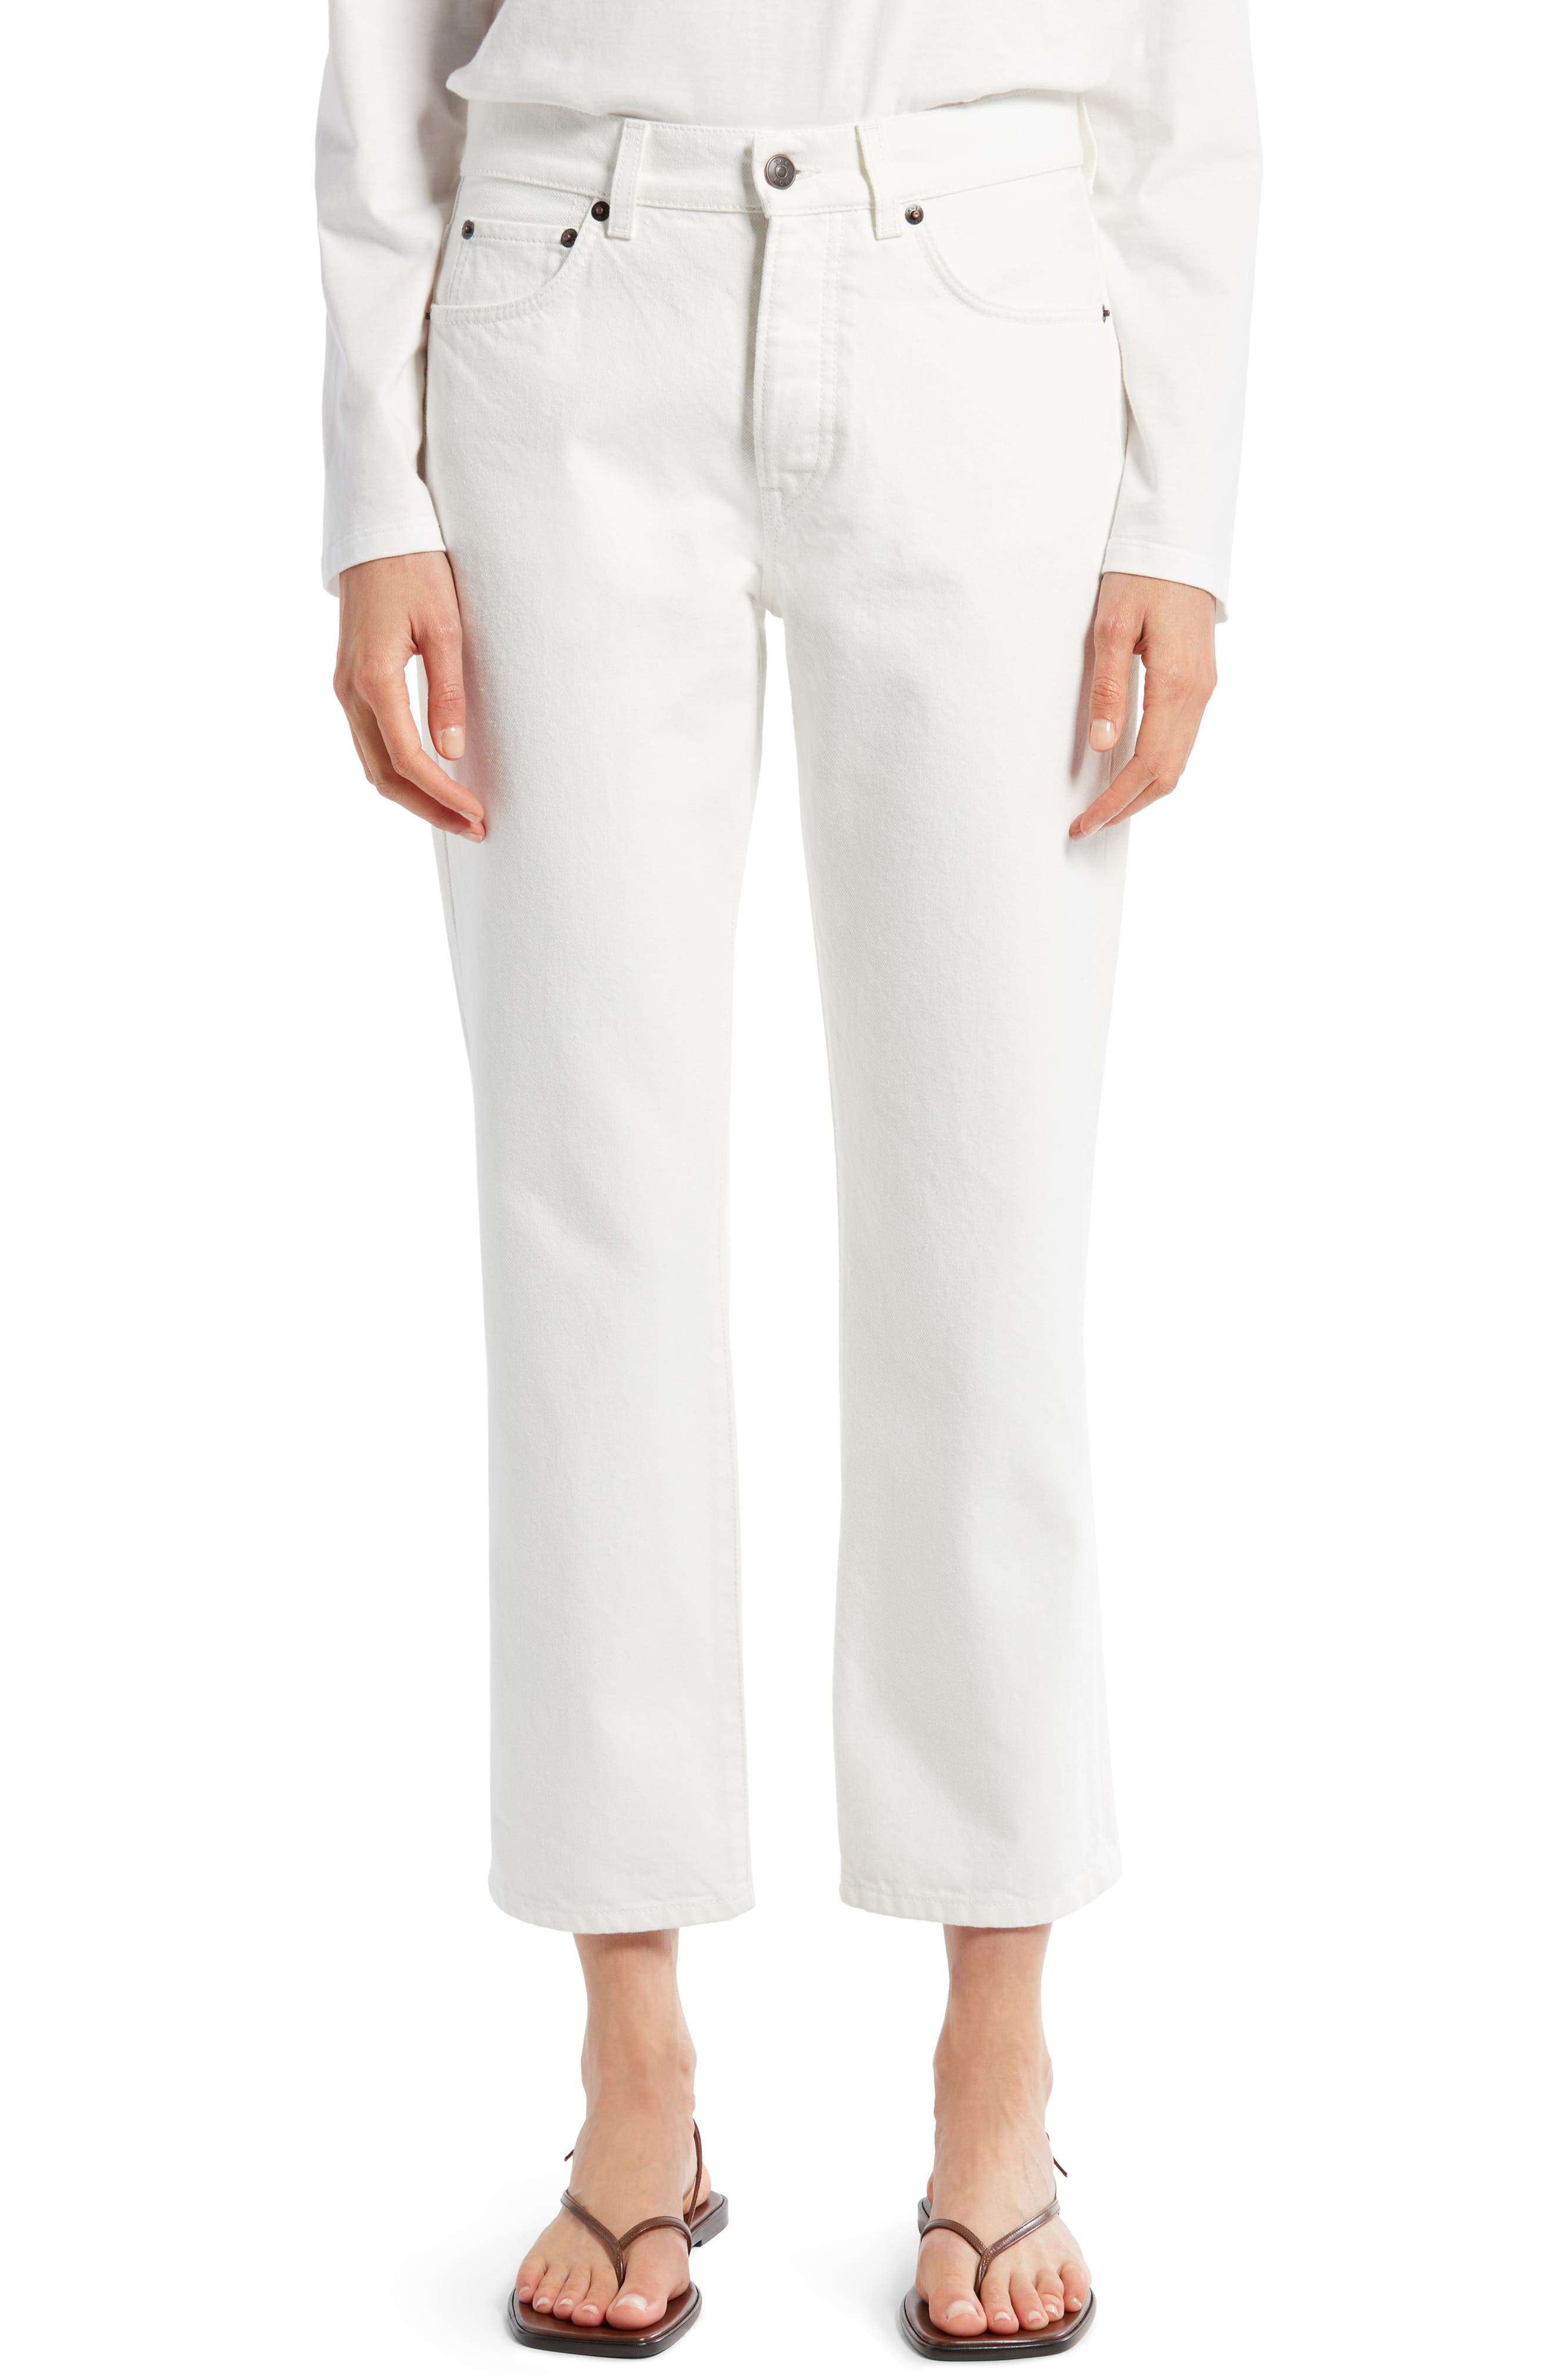 The Row Lesley Straight Crop Jeans in White at Nordstrom, Size 8